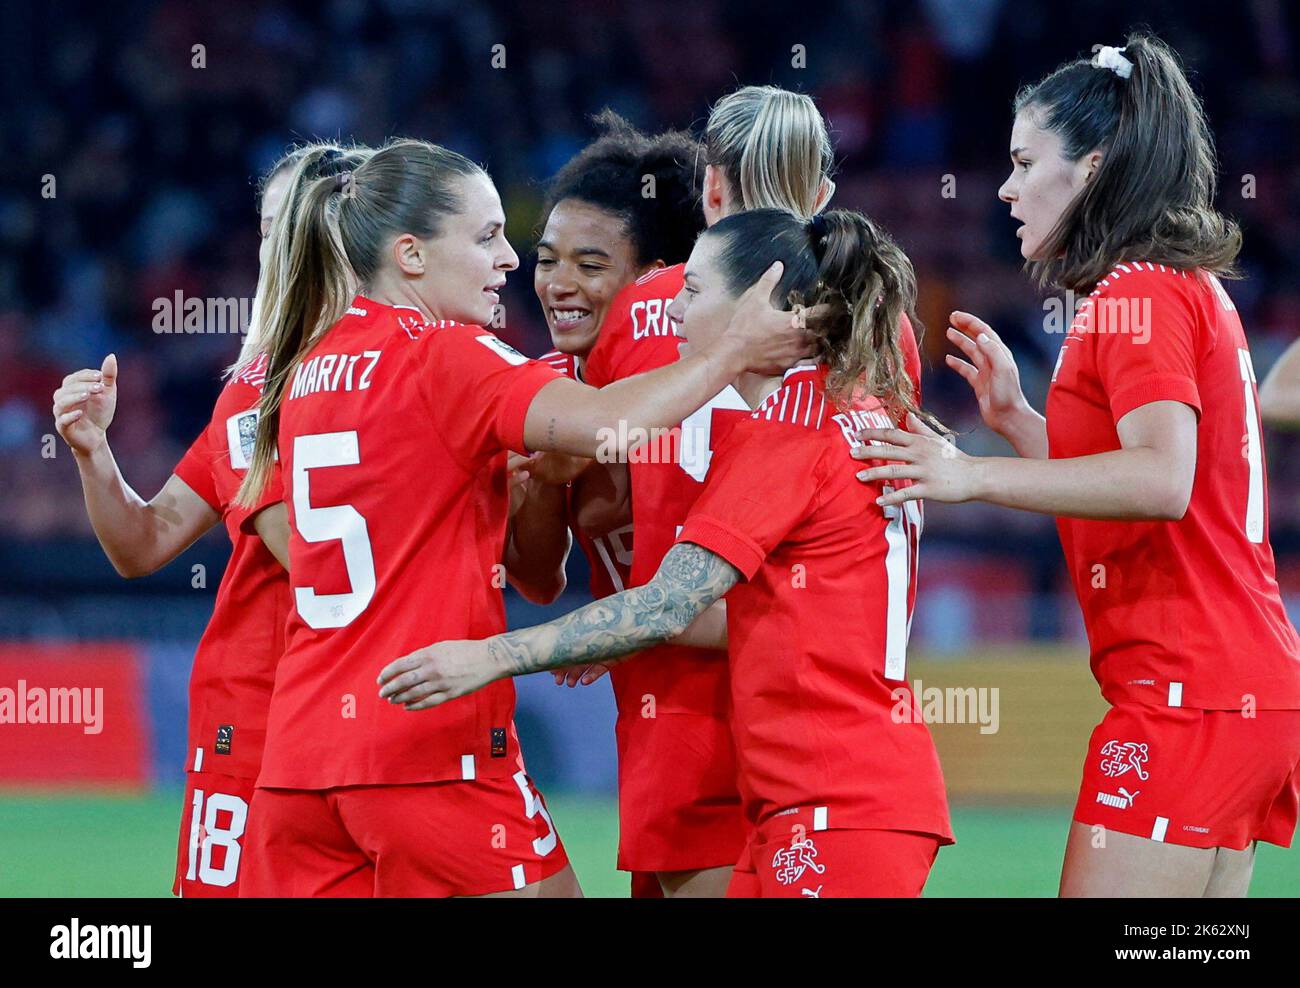 Soccer Football - FIFA Women's World Cup - UEFA Qualifiers - Switzerland v Wales - Stadion Letzigrund, Zurich, Switzerland - October 11, 2022 Switzerland's Ramona Bachmann celebrates scoring their first goal with teammates REUTERS/Stefan Wermuth Stock Photo